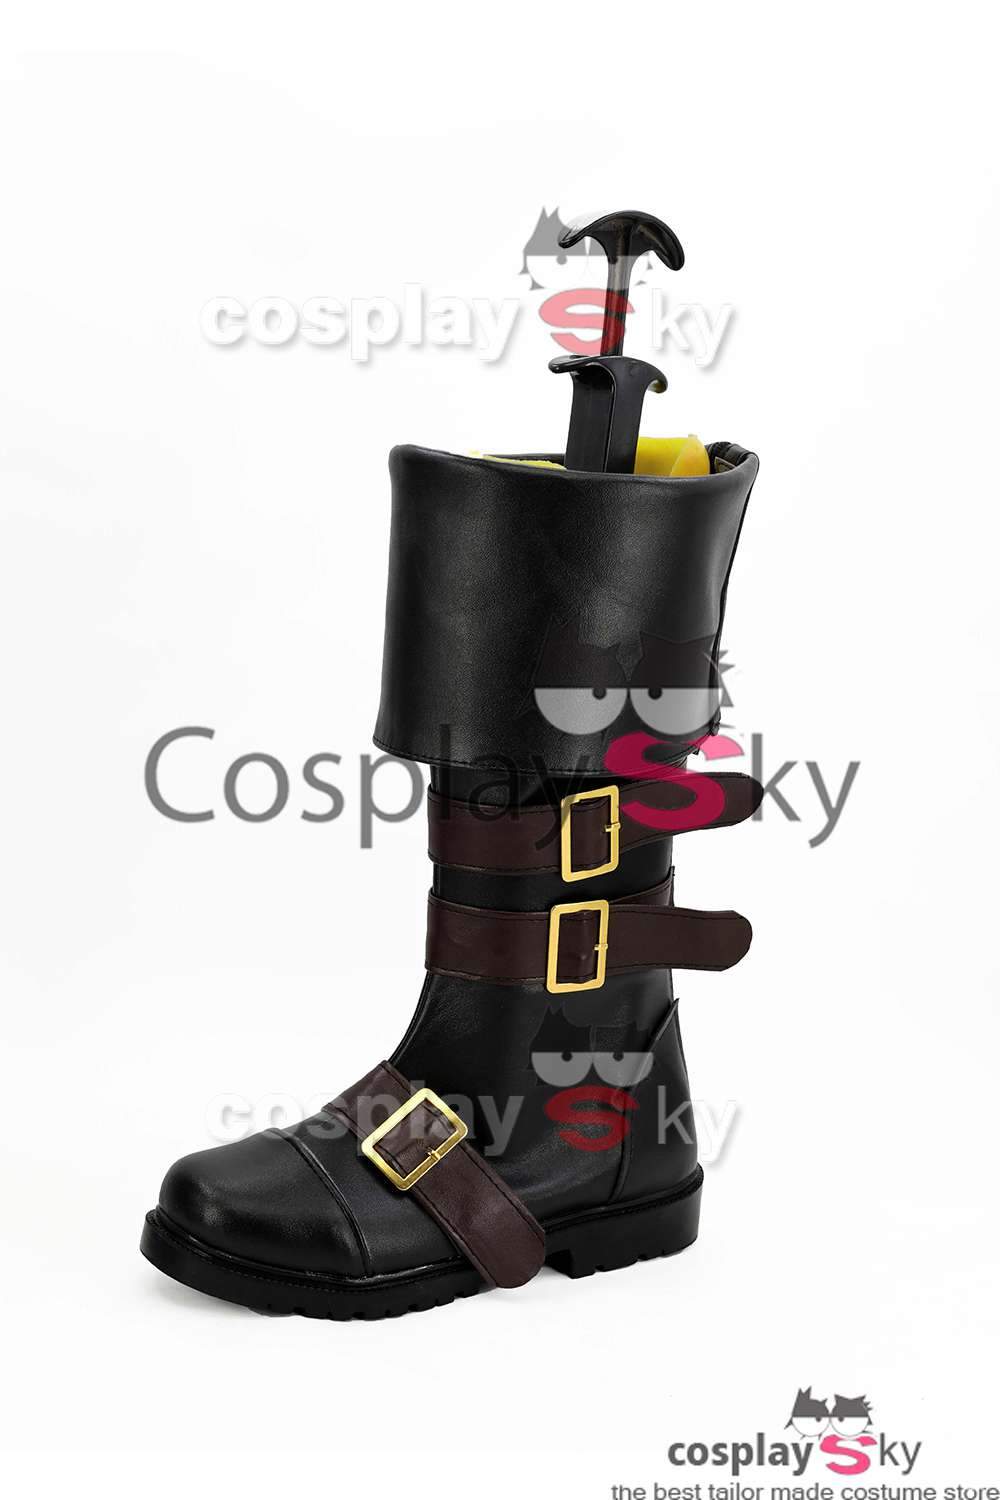 NieR/ Nier: Automata 9S Boots Cosplay Shoes